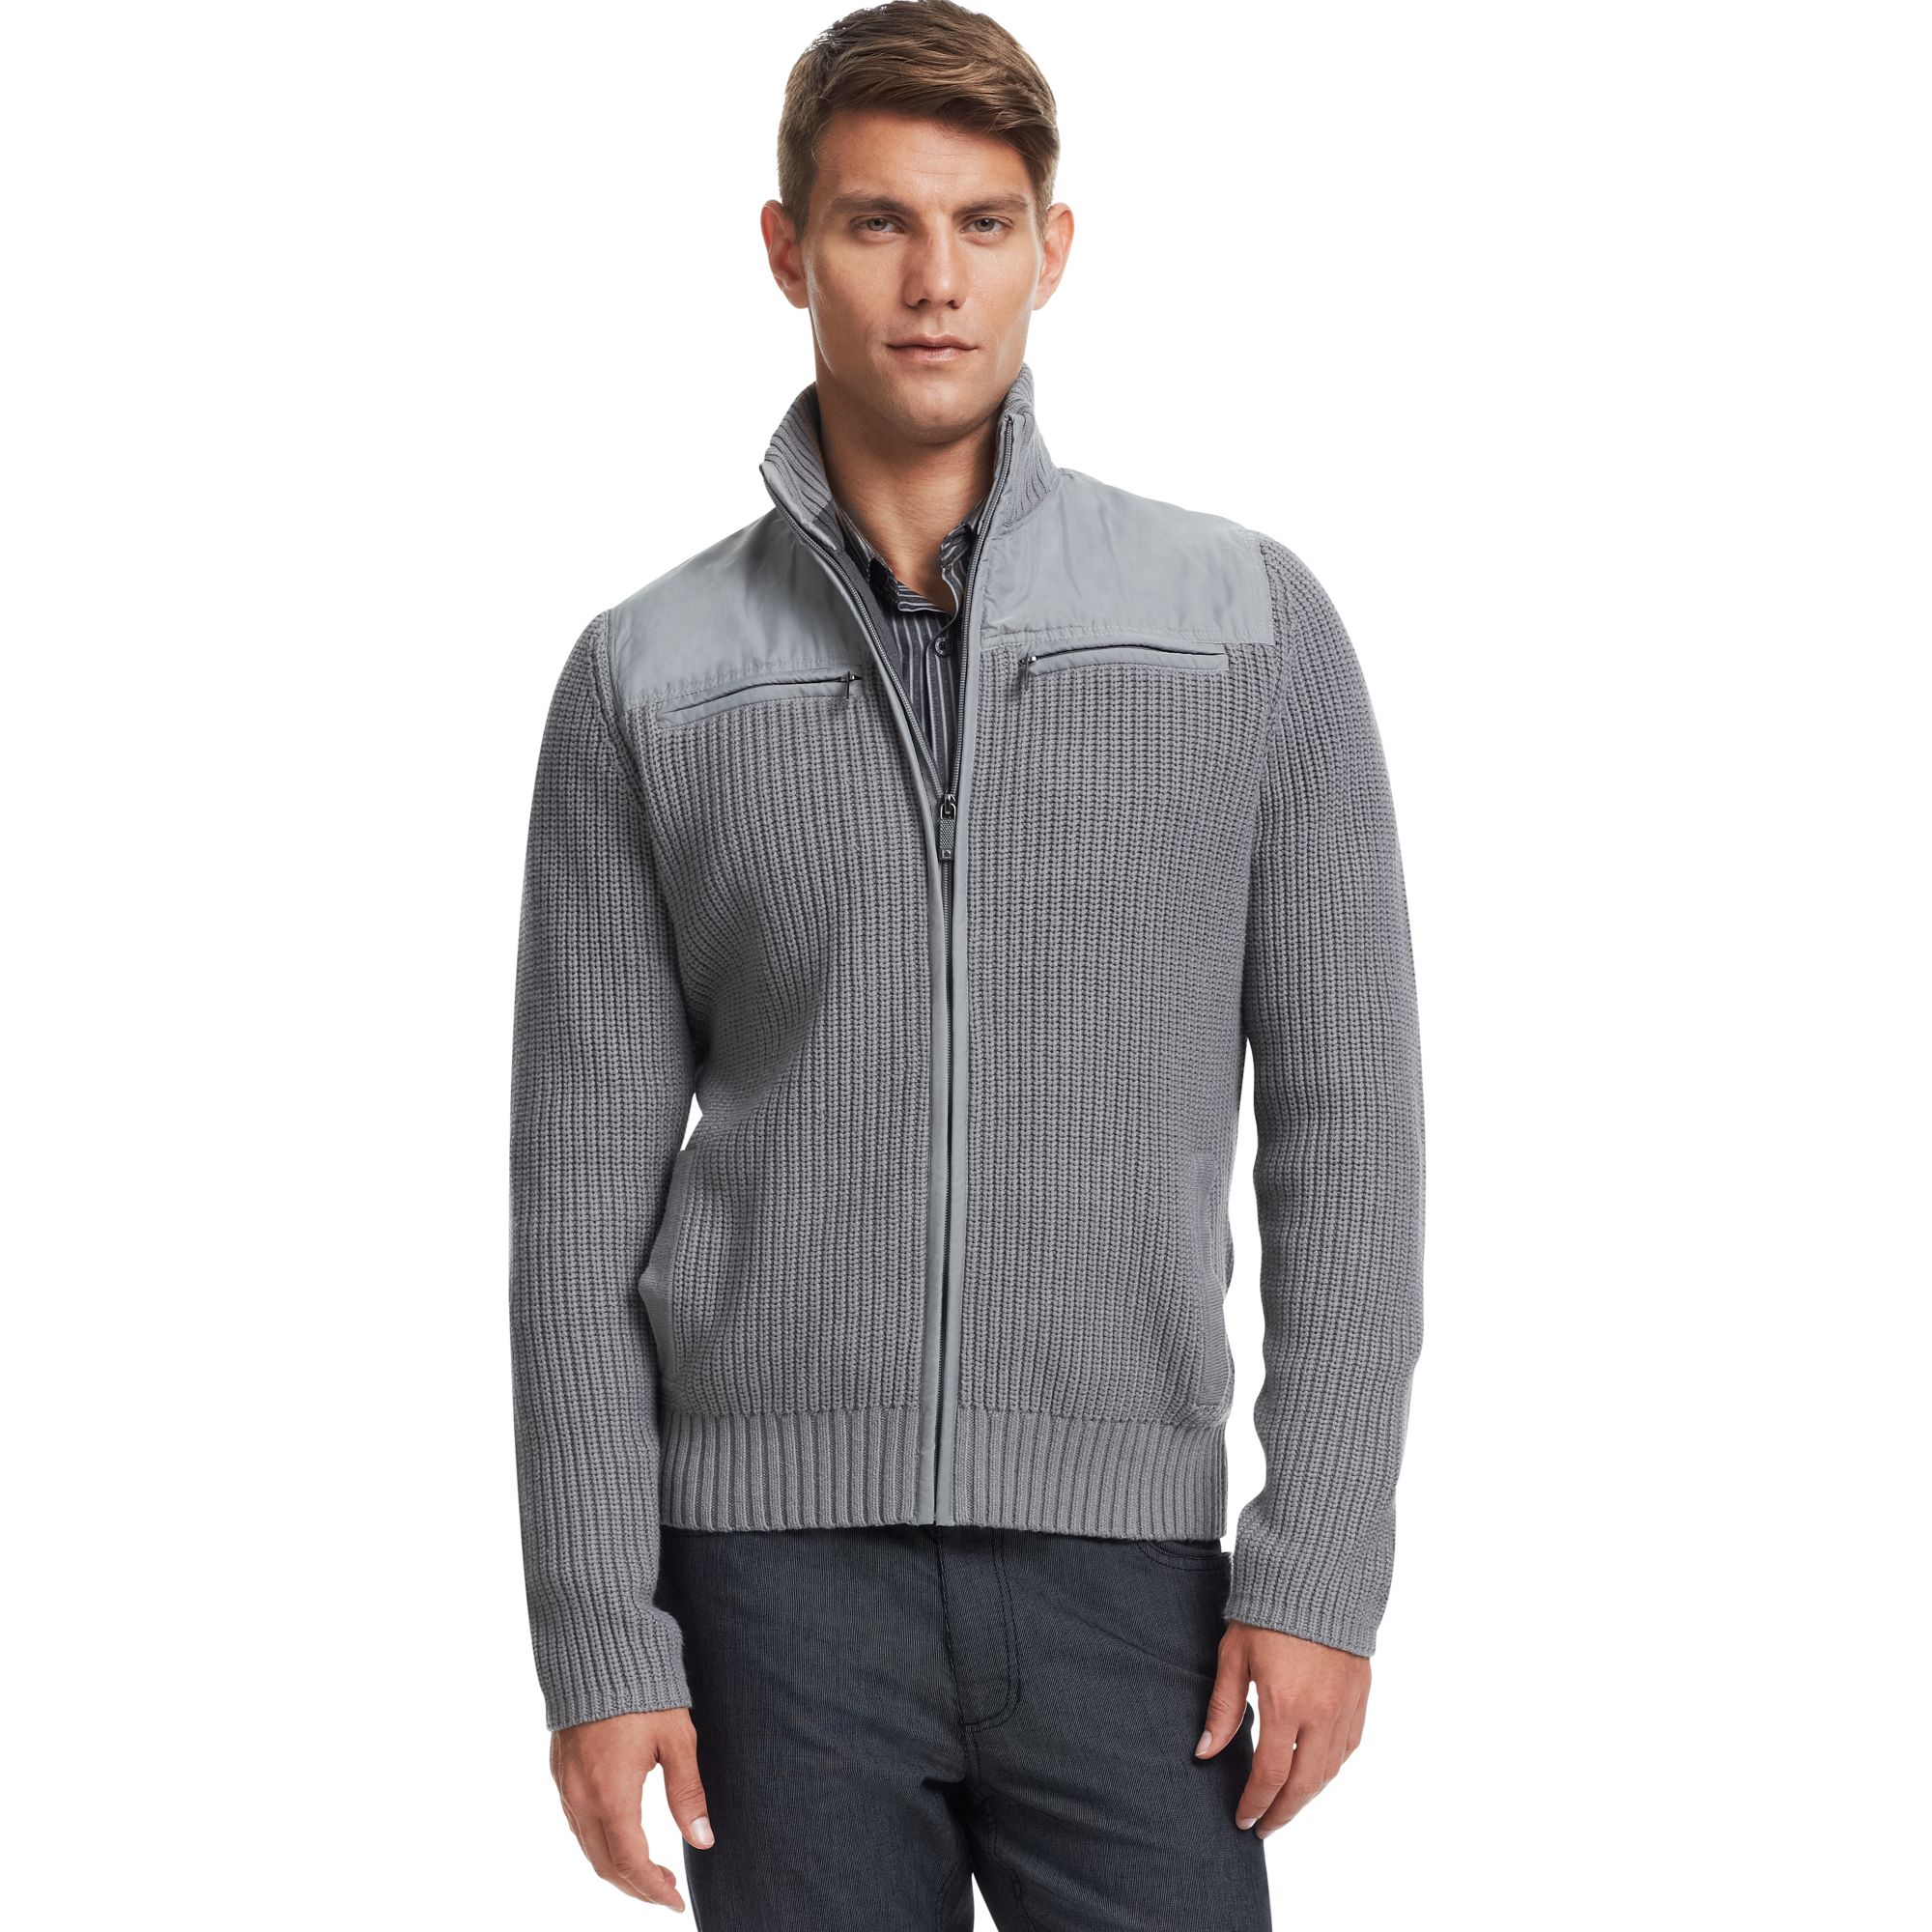 Kenneth Cole Reaction Sweater France, SAVE 33% - mpgc.net